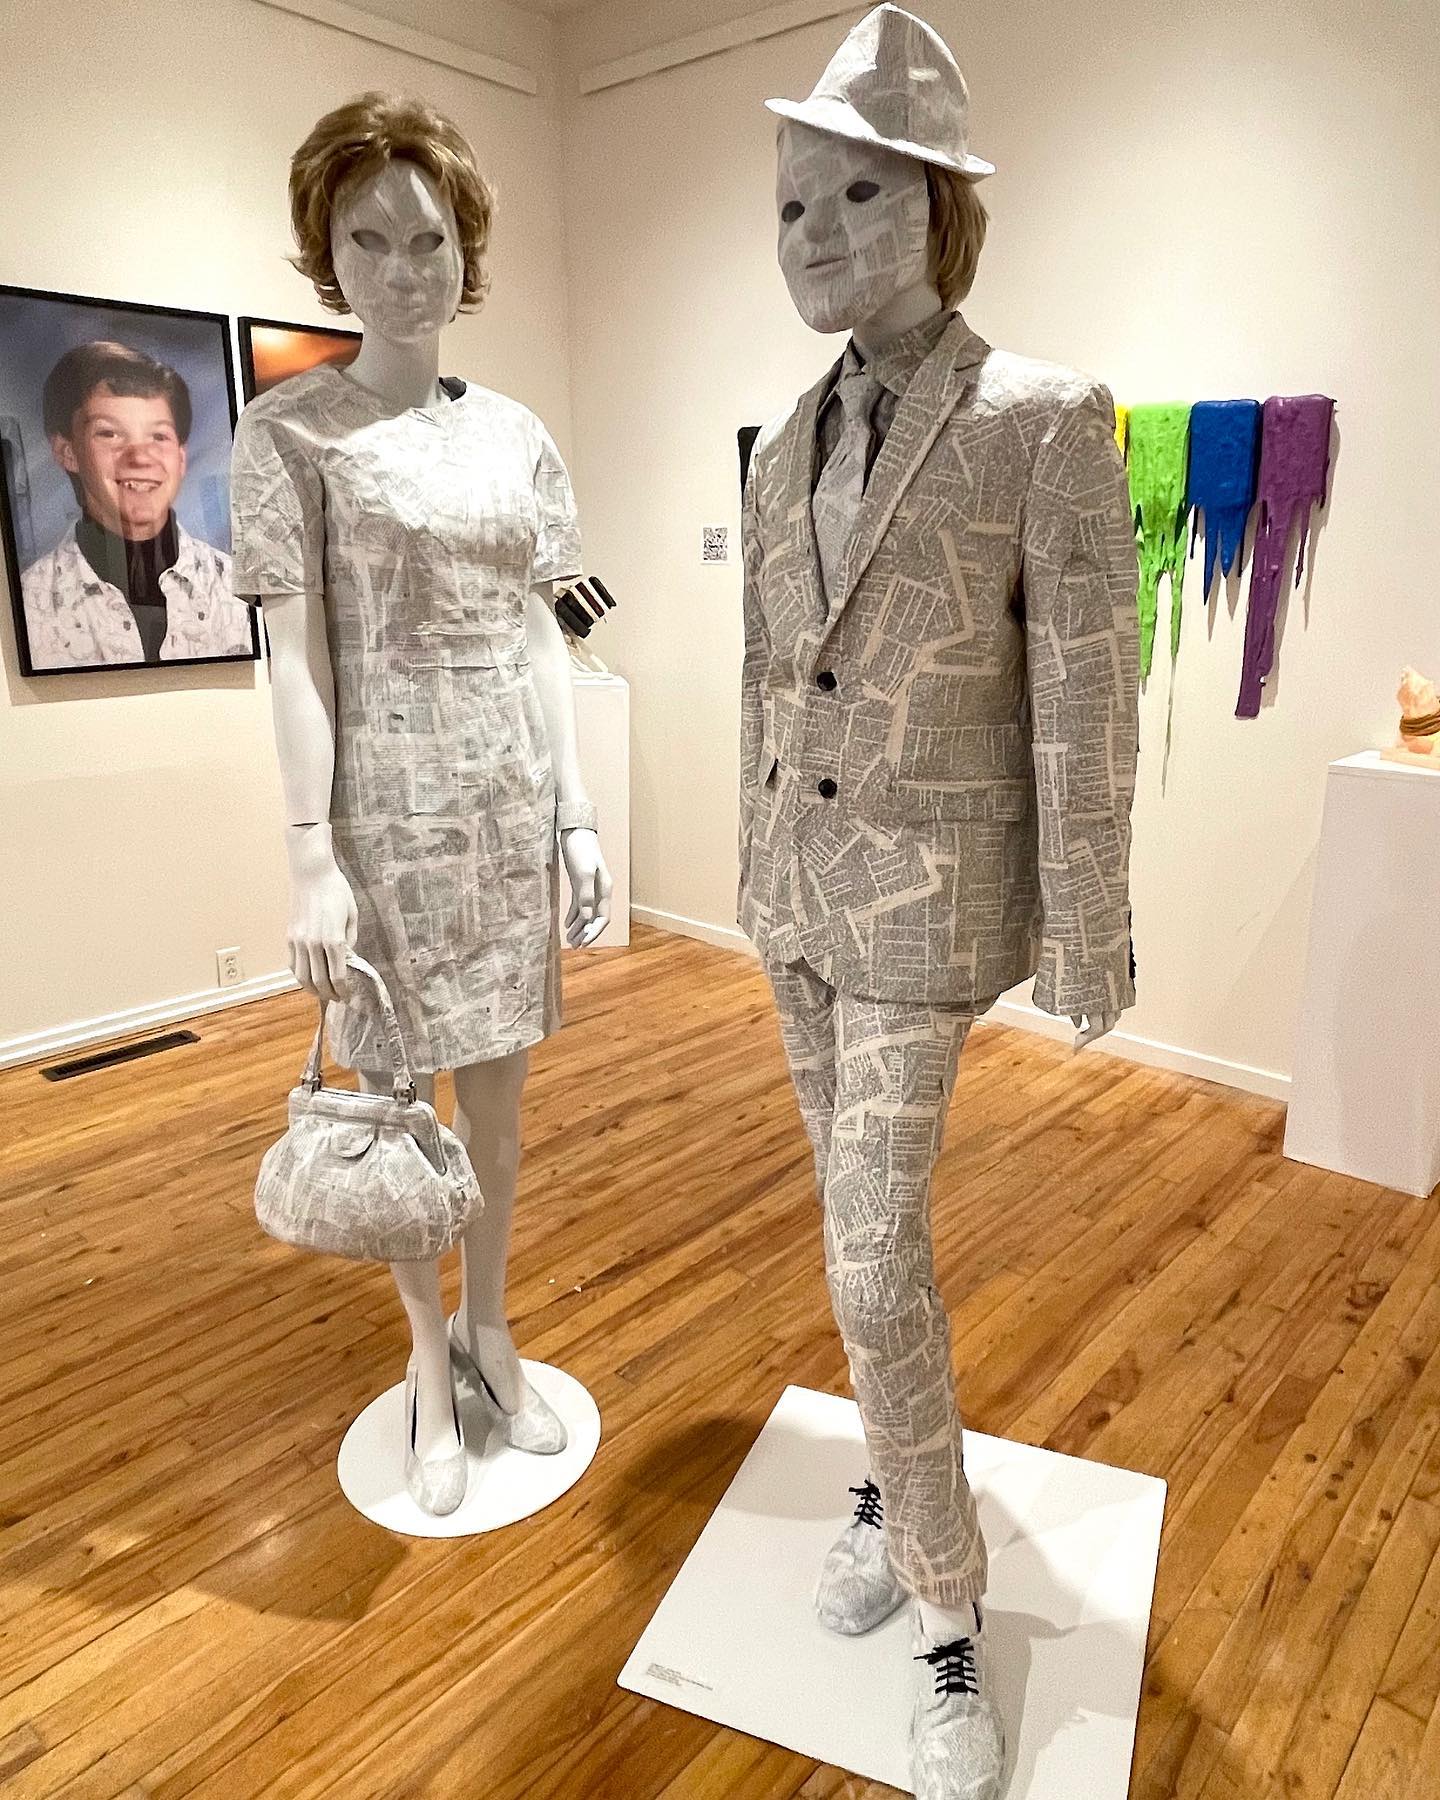 human figures made of papier maché made from bible pages